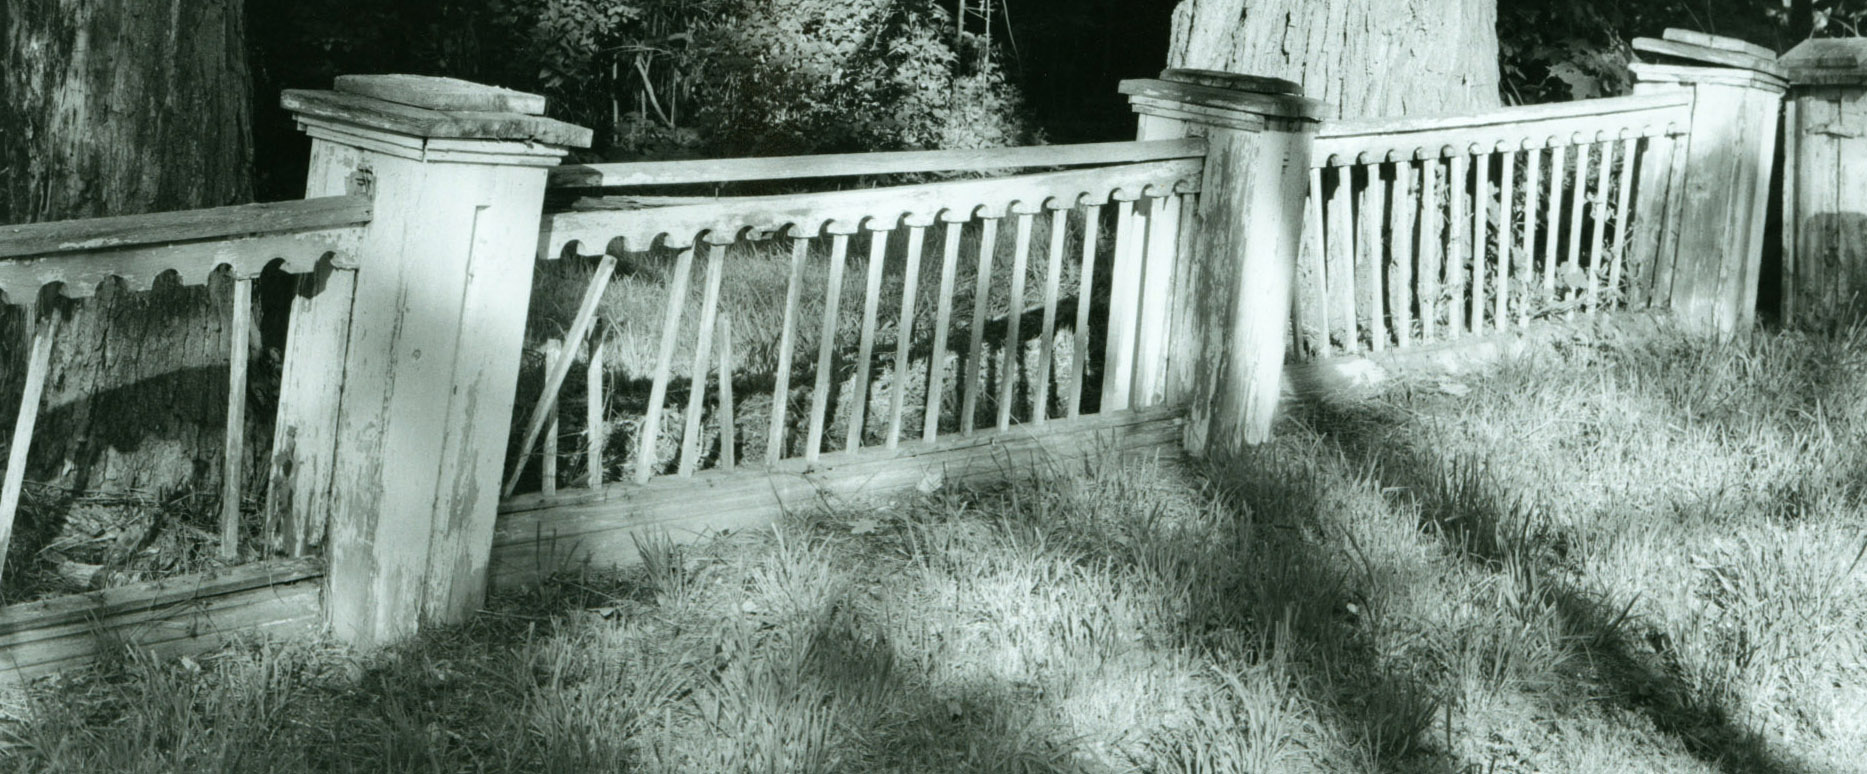 Image of a fence from the Arthur Mange exhibit